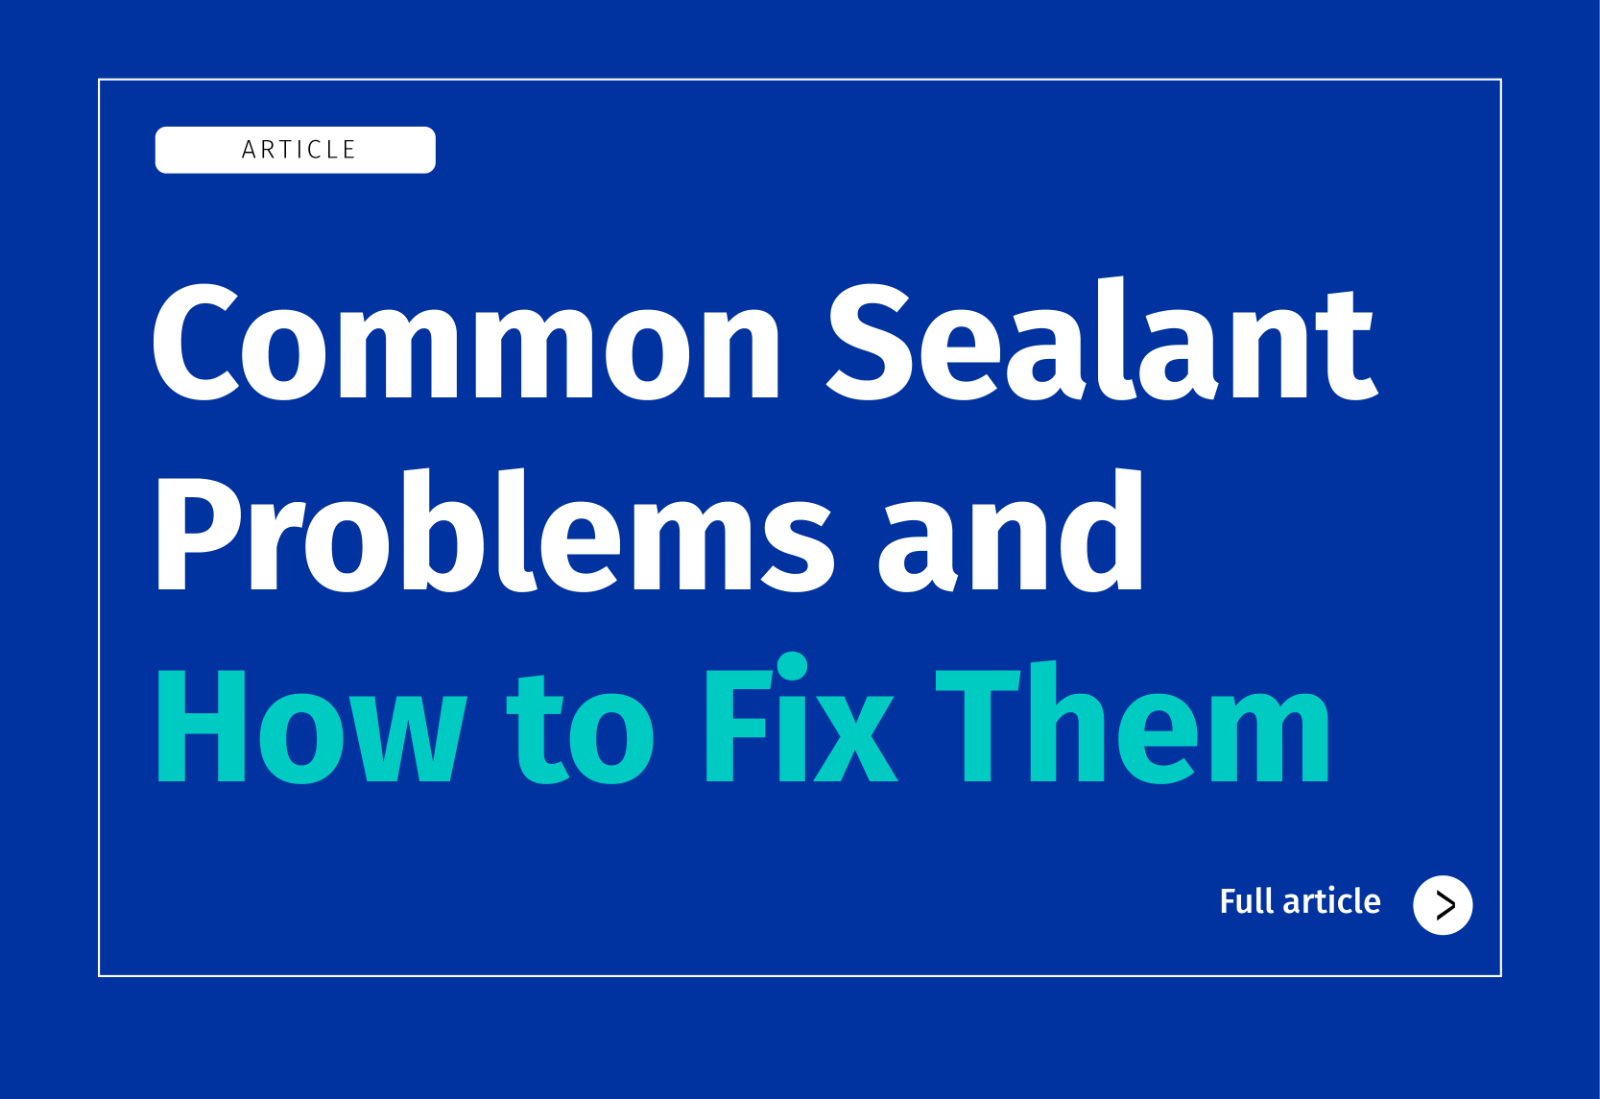 Common Sealant Problems and How to Fix Them